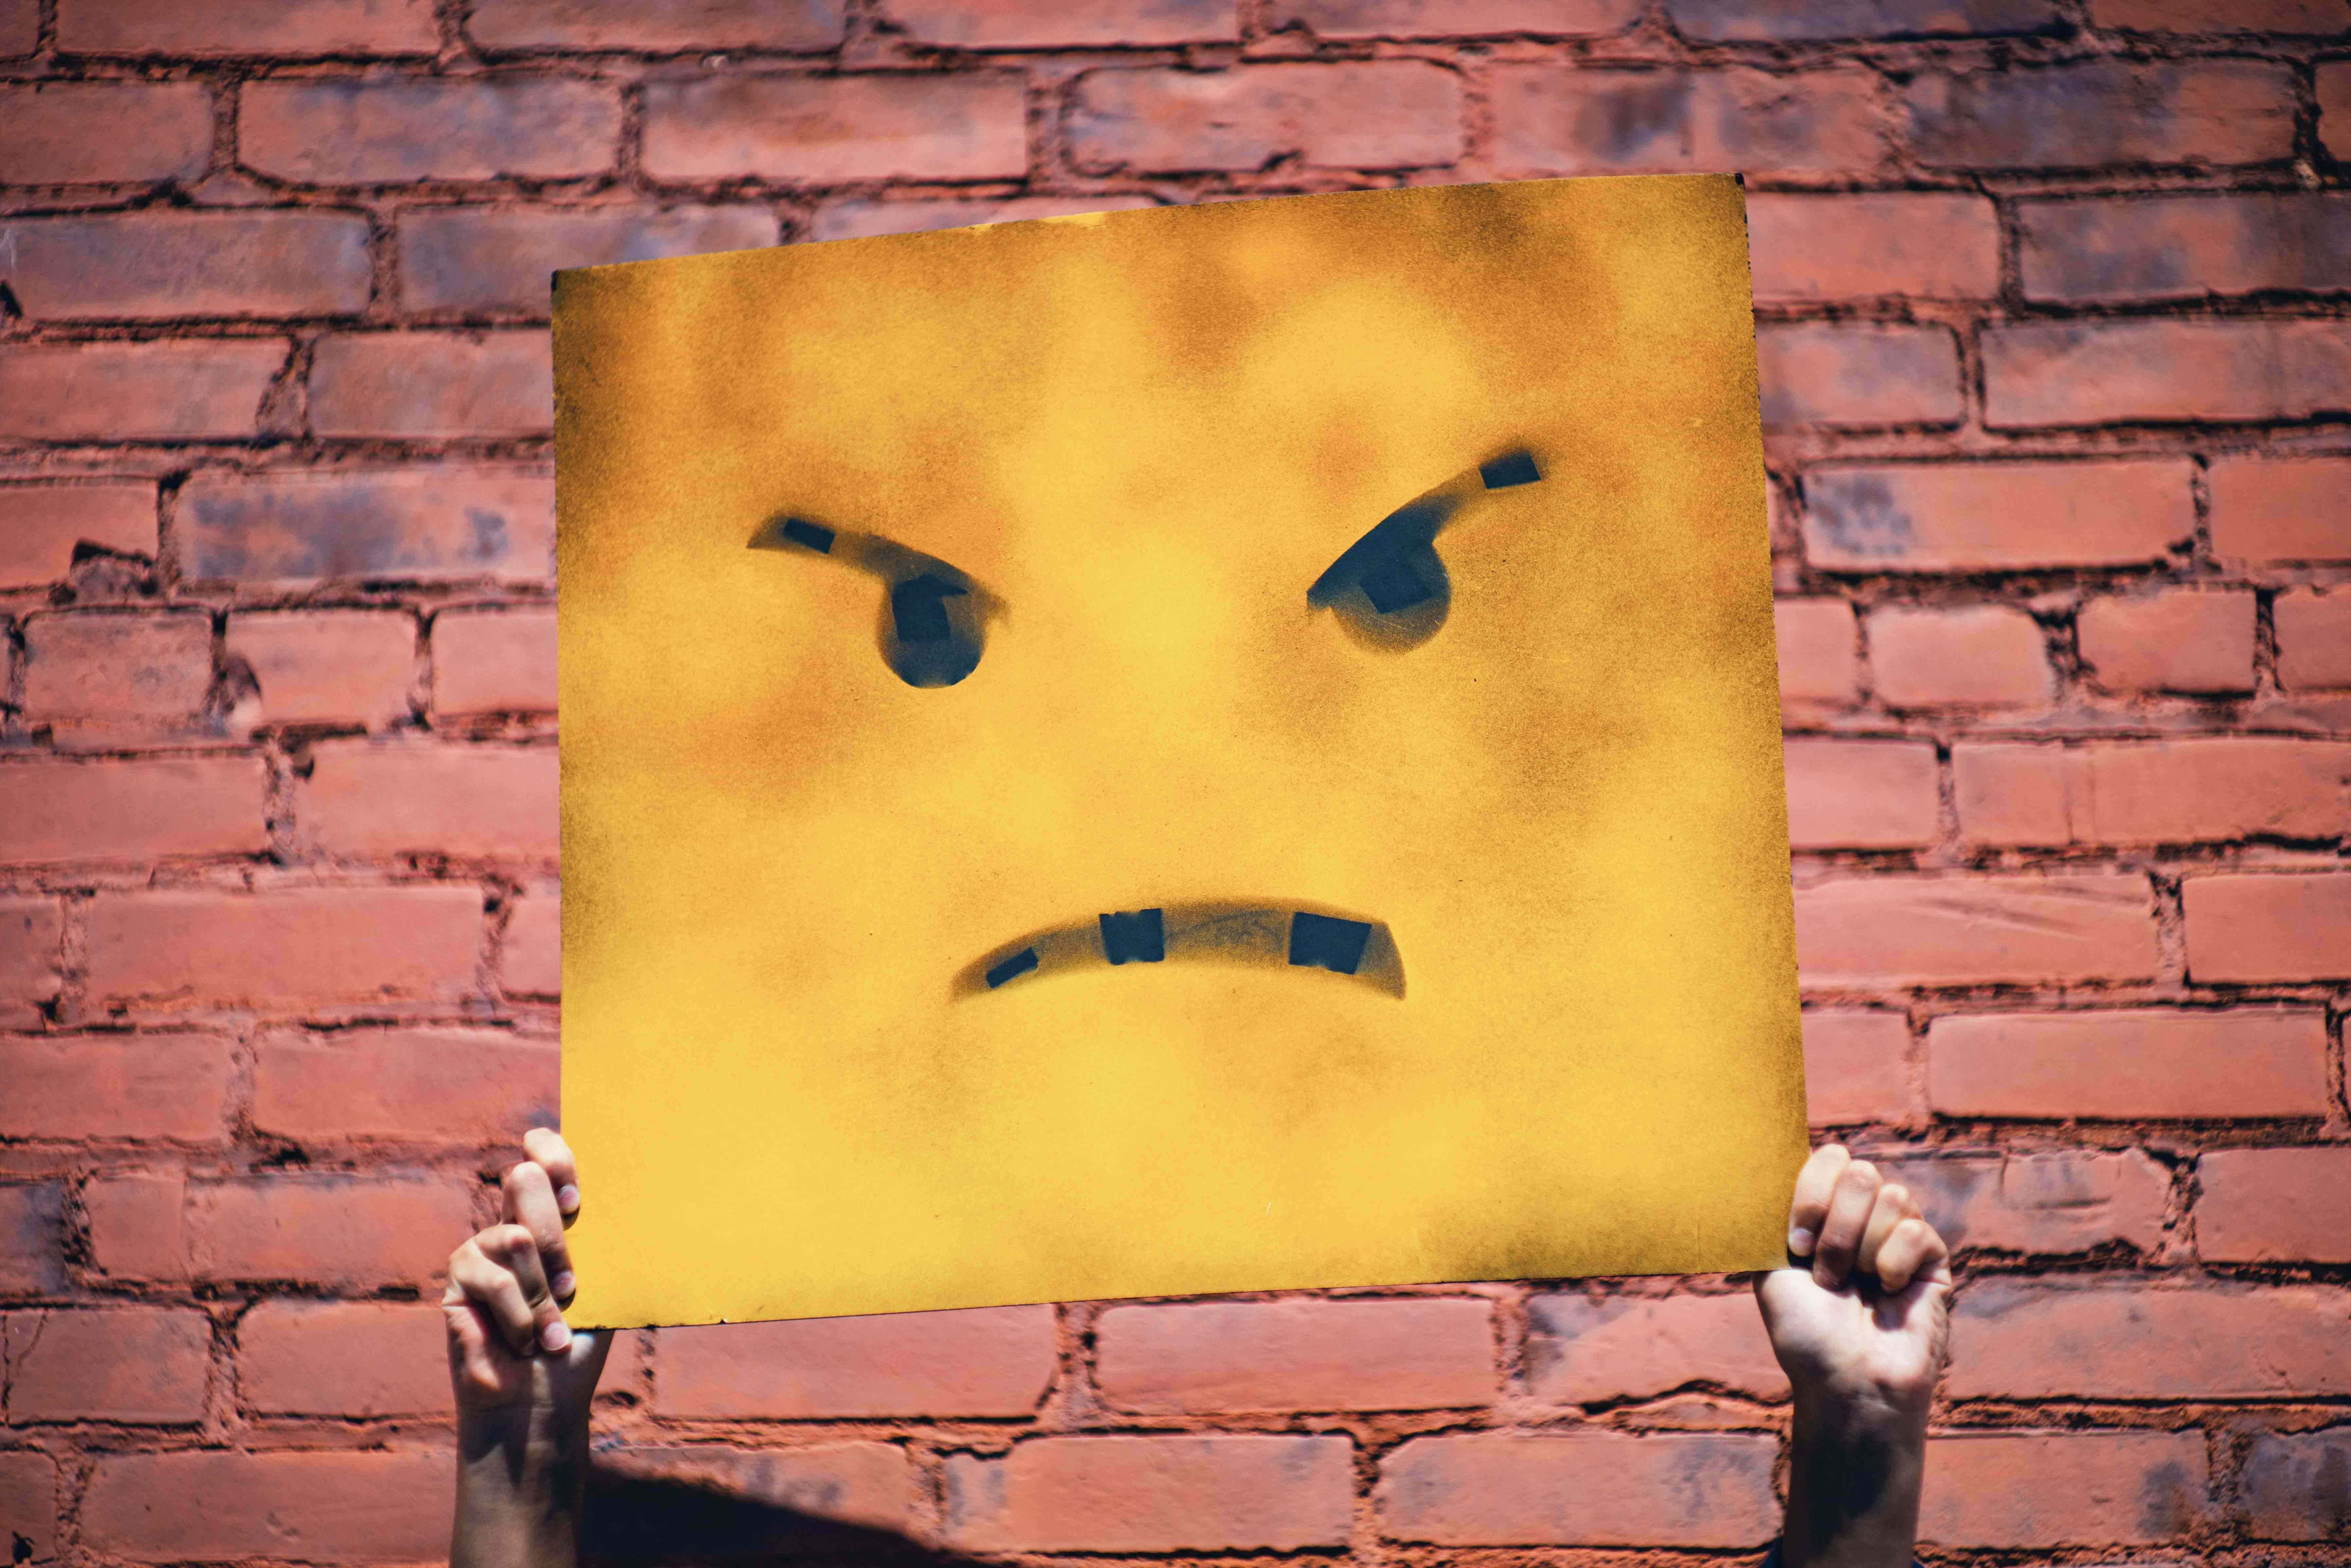 Someone holding a cardboard with a drawing of an angry face